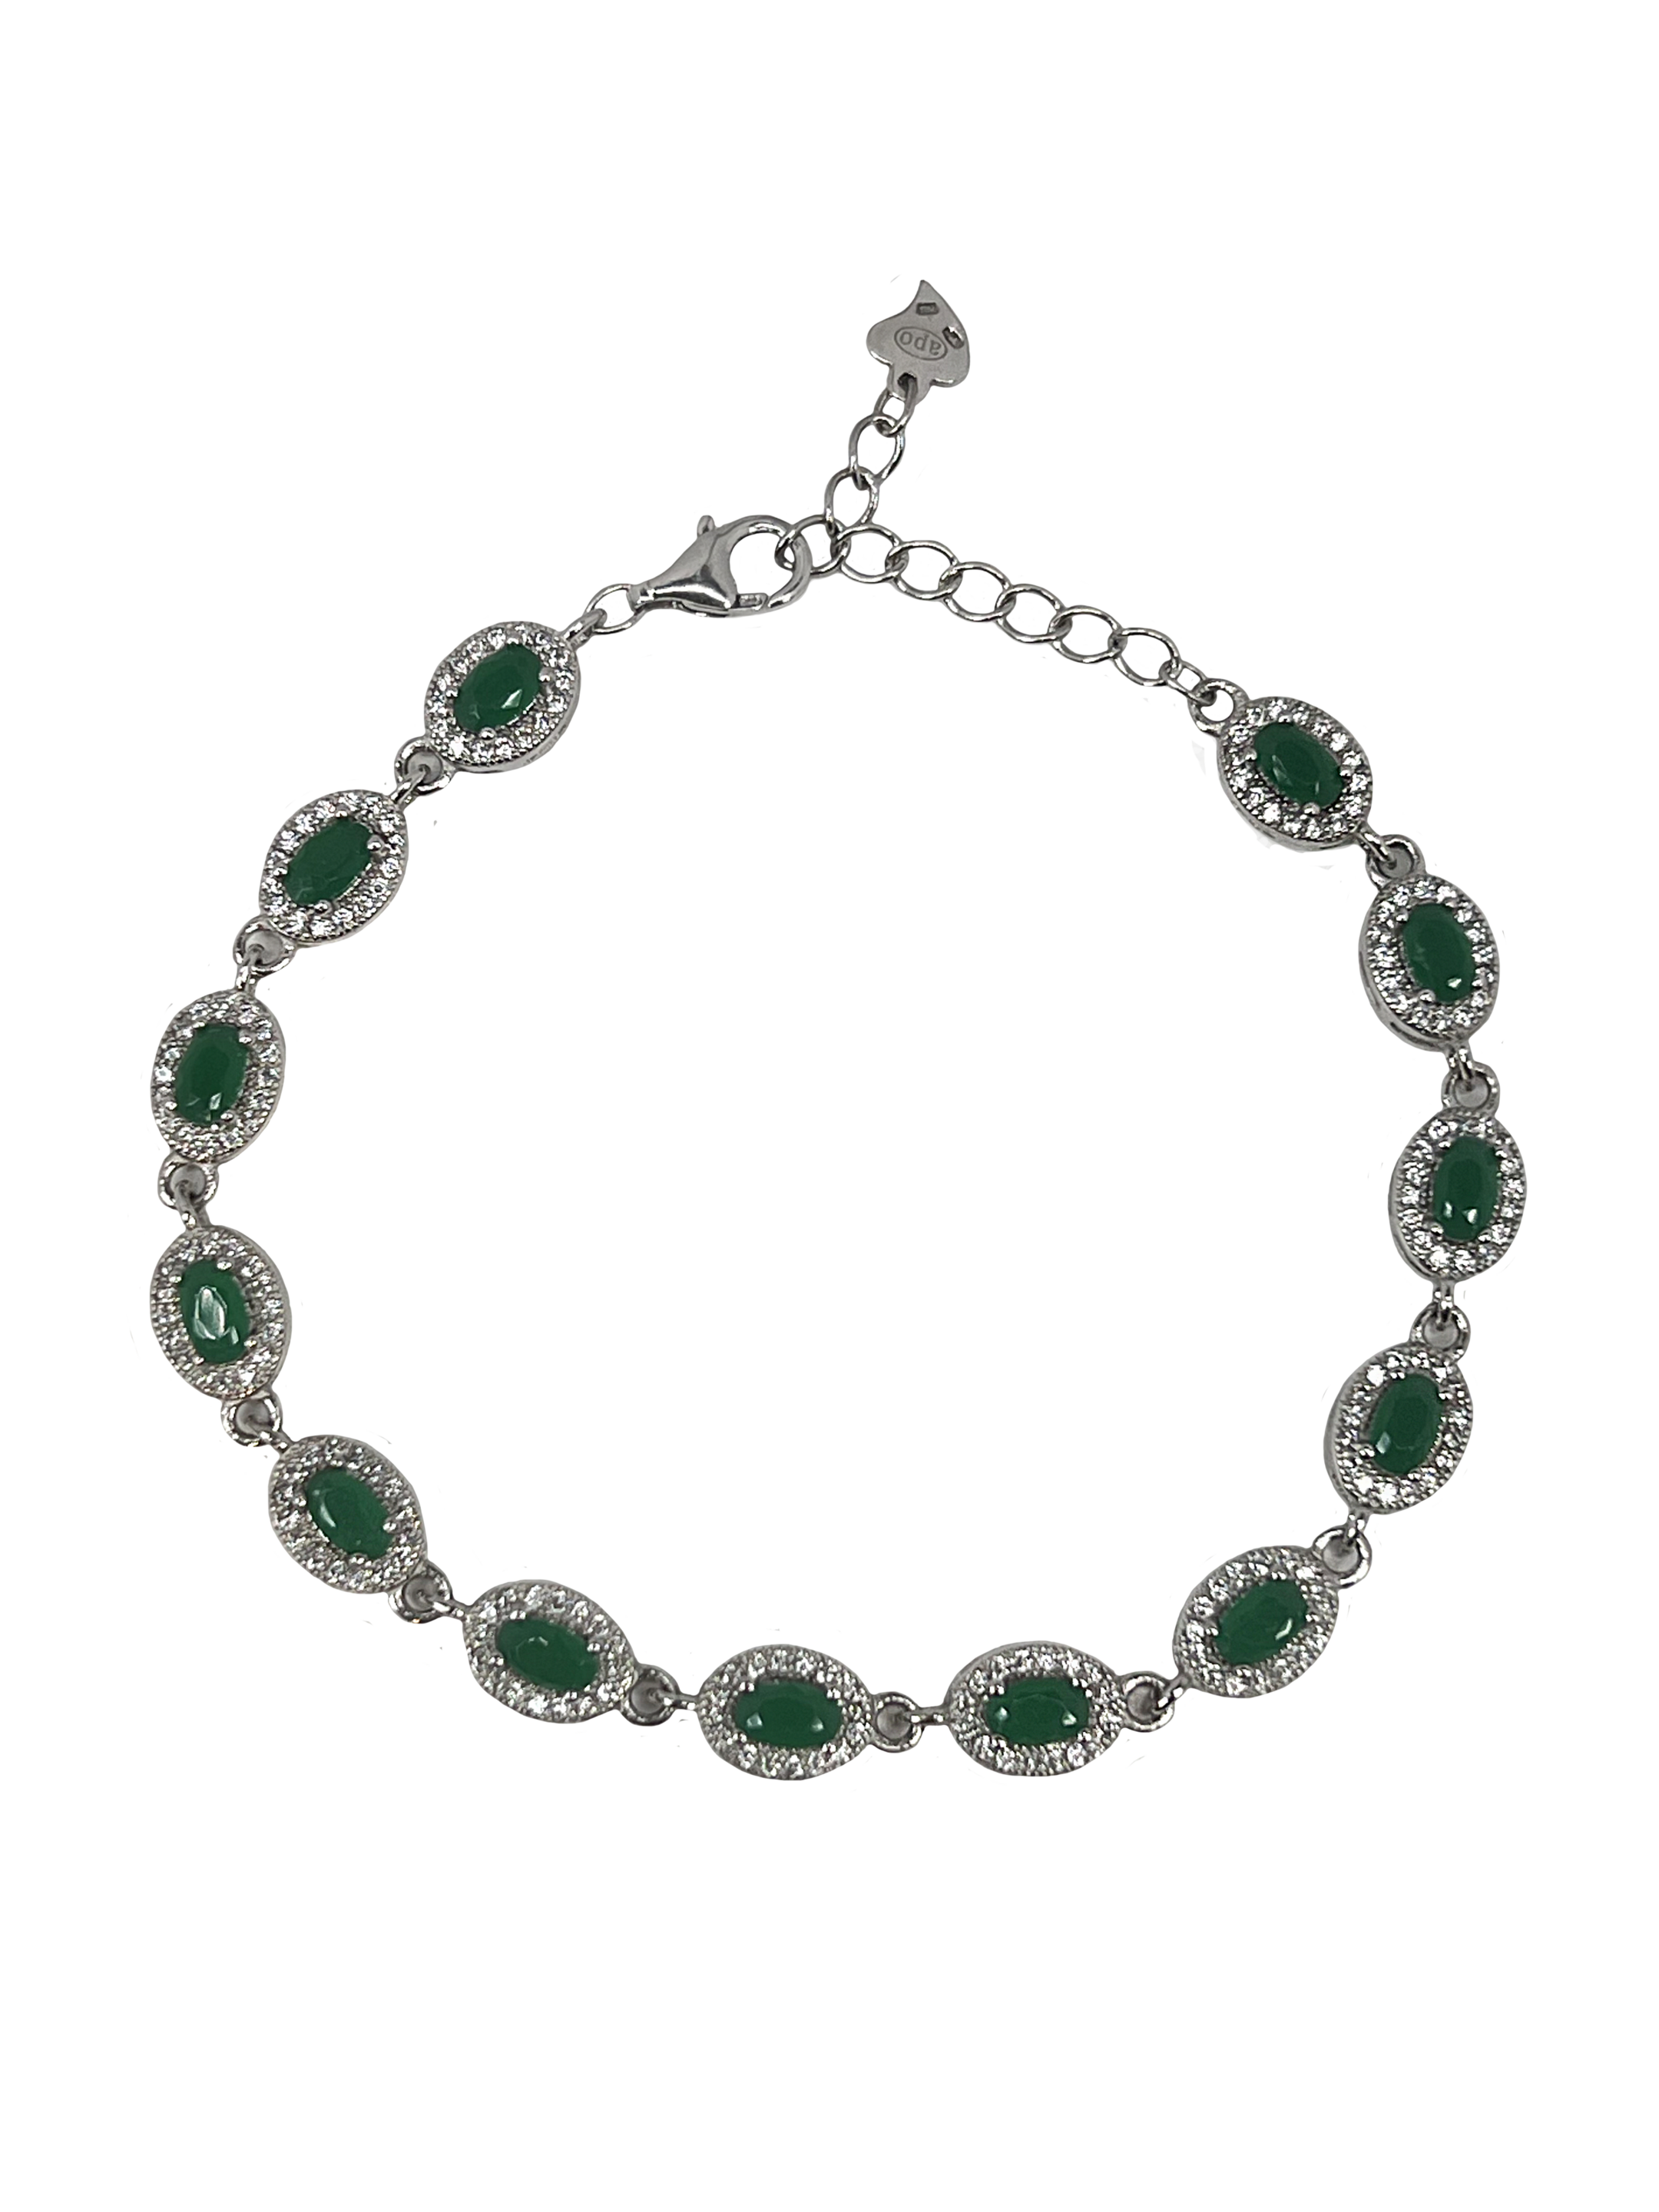 Silver bracelet with crystals and green stones